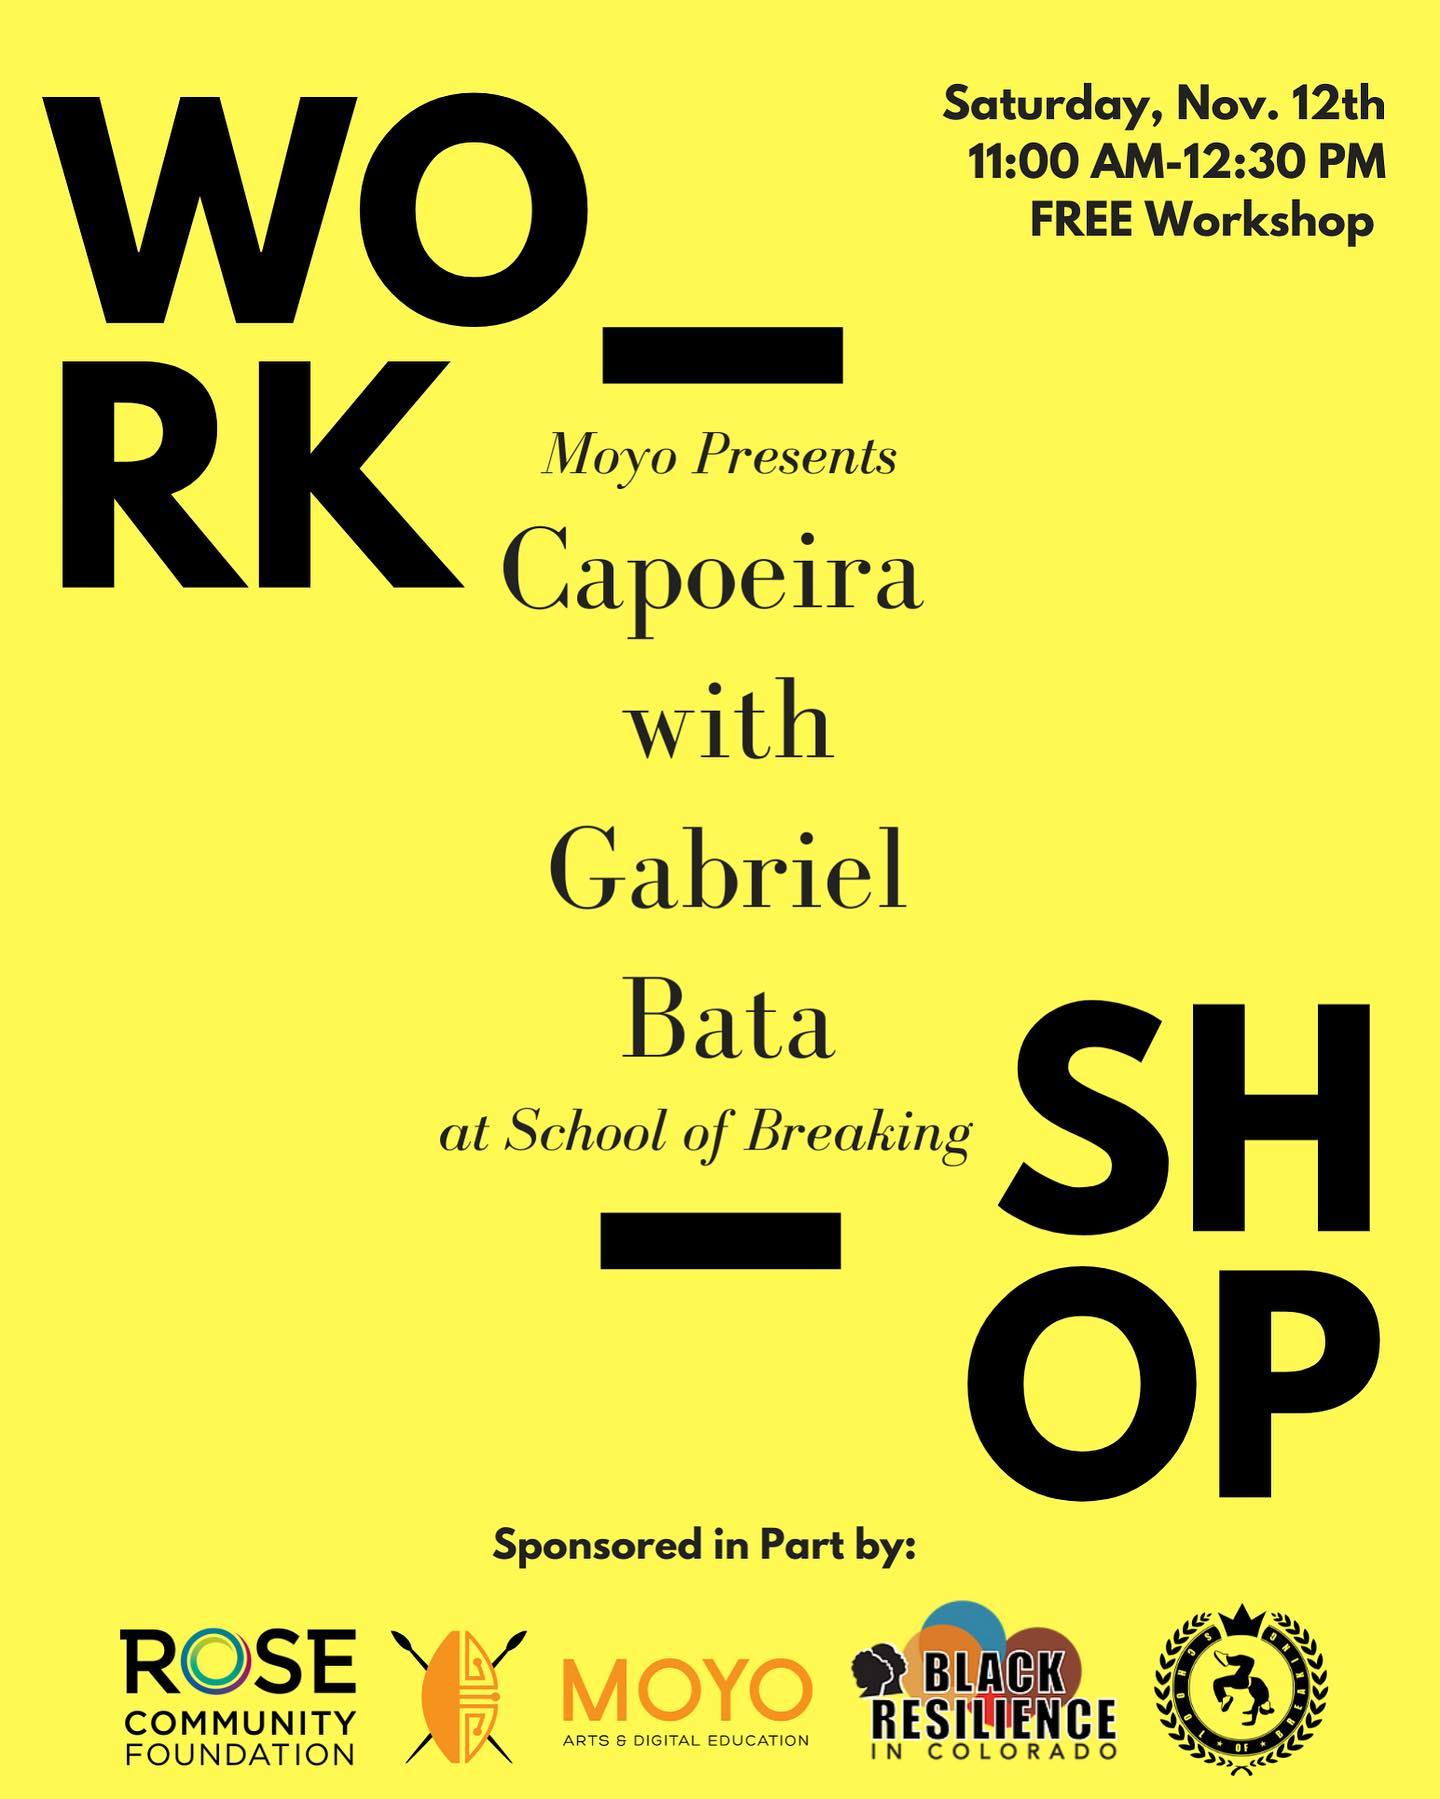 Next up, we have another free workshop going down this Saturday, November 12th. 

This workshop features @gabrielbata7 who will be teaching Capoeira.

Capoeira Angola is the traditional artistic form developed by descendants of Africans in Brazil during colonial times. 

This art form combines dance, martial arts, music and philosophy. 

In this workshop, the students will be introduced to all the different elements of Capoeira.

Register today as space is limited, link in bio!

@moyocac @rcfdenver @bric_fund #schoolofbreaking #workshop #capoeira #gabrielbata #art #culture #expressfreely #peace #love #unity #havingfun